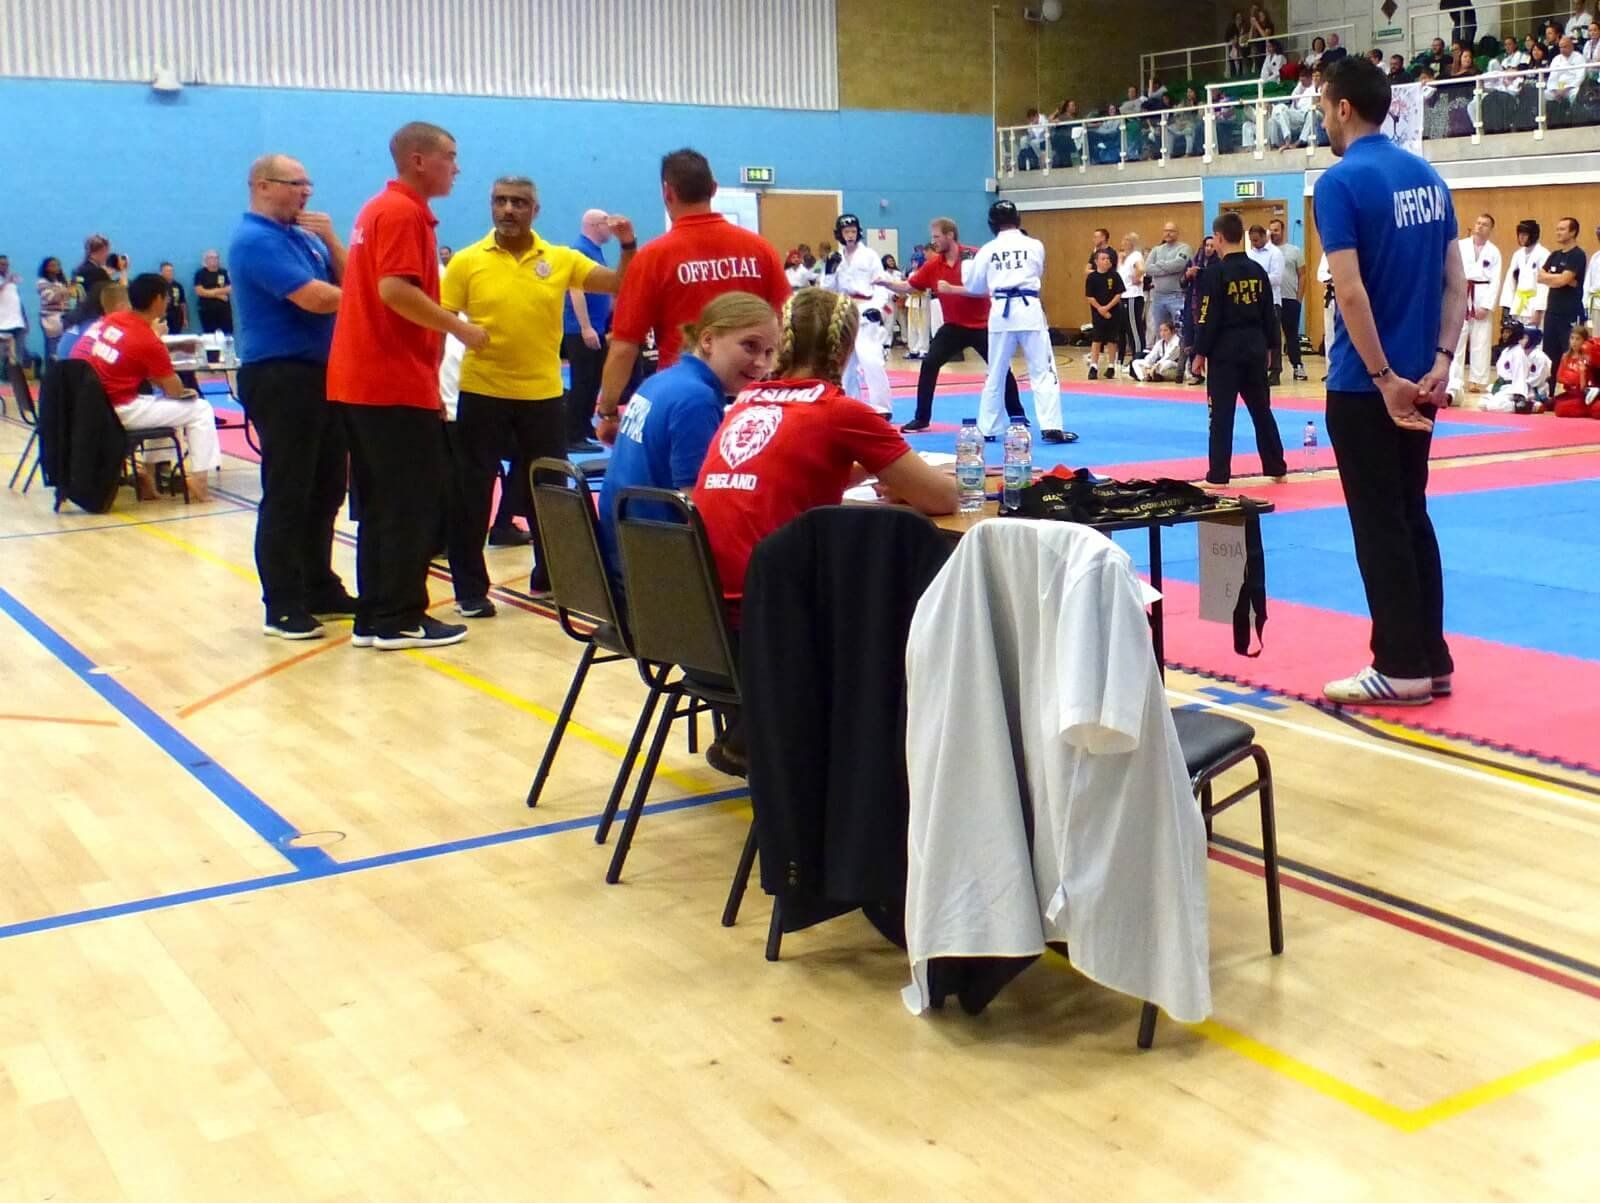 competition hall and officials